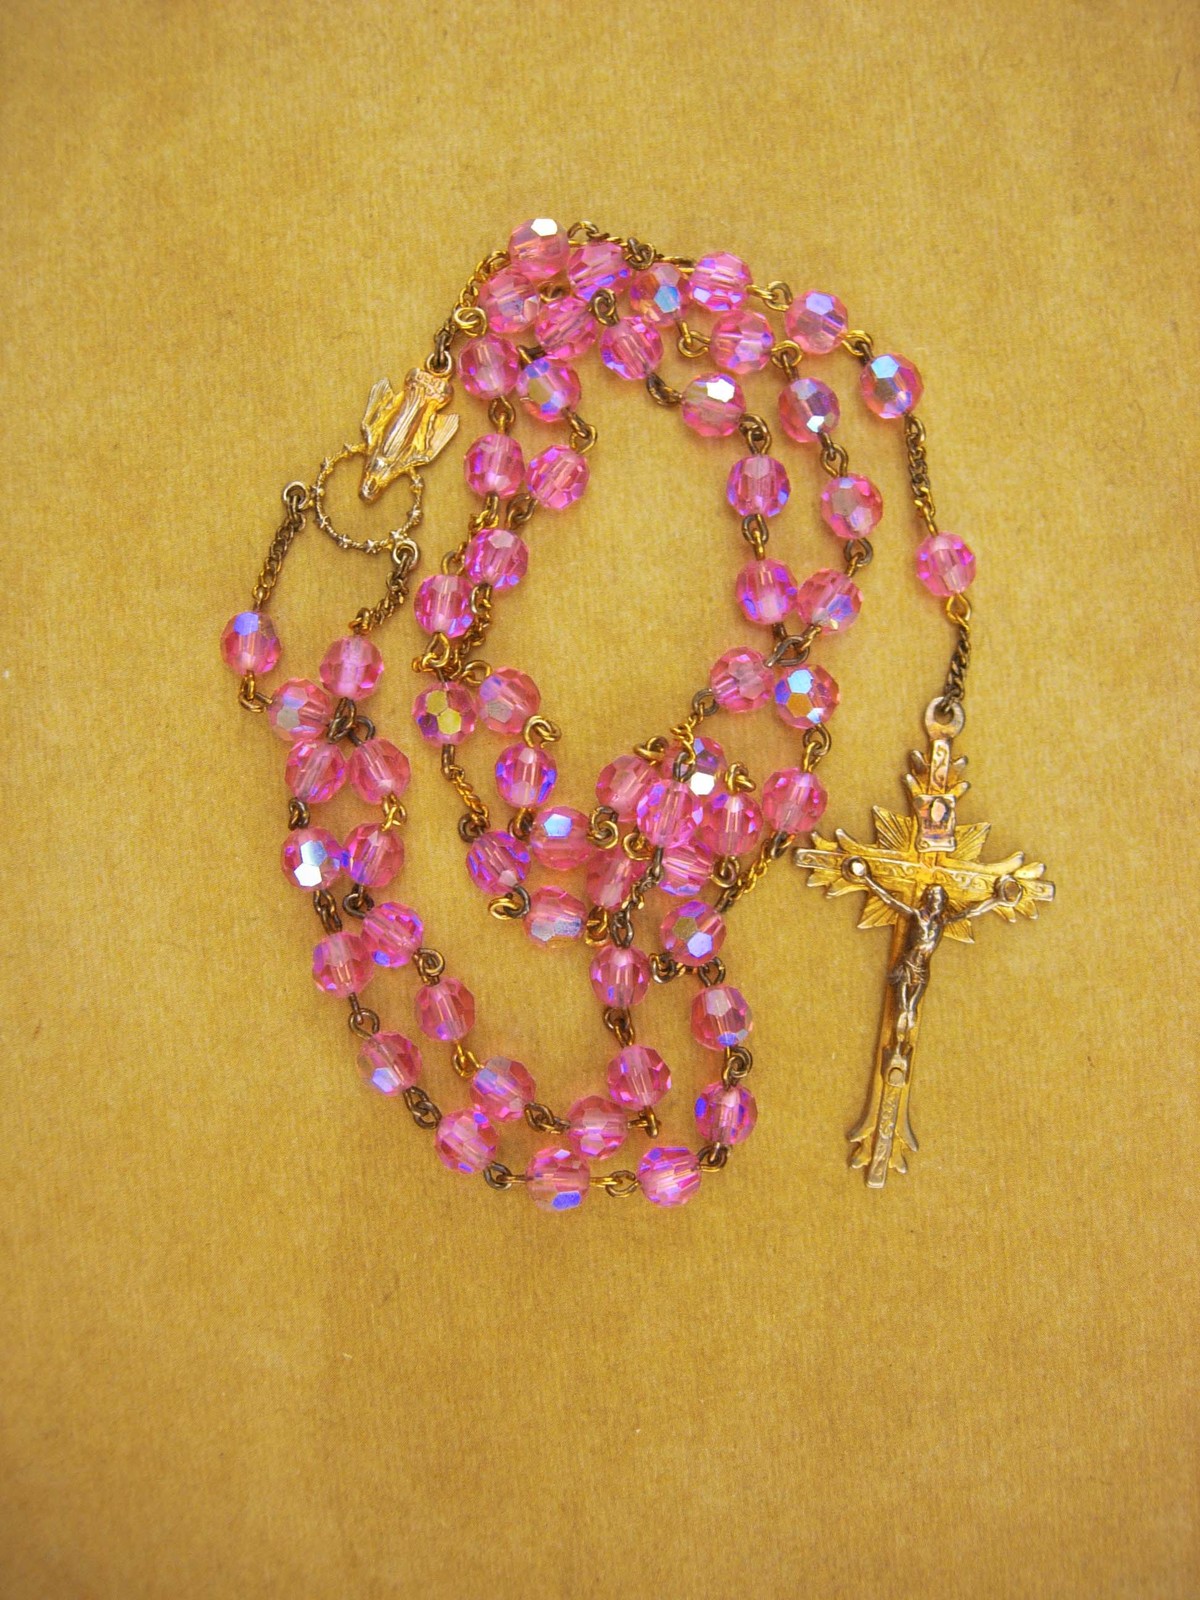 Vintage 1950's Glass sterling Rosary - Italy pink aurora borealis beads - Roma c - $125.00